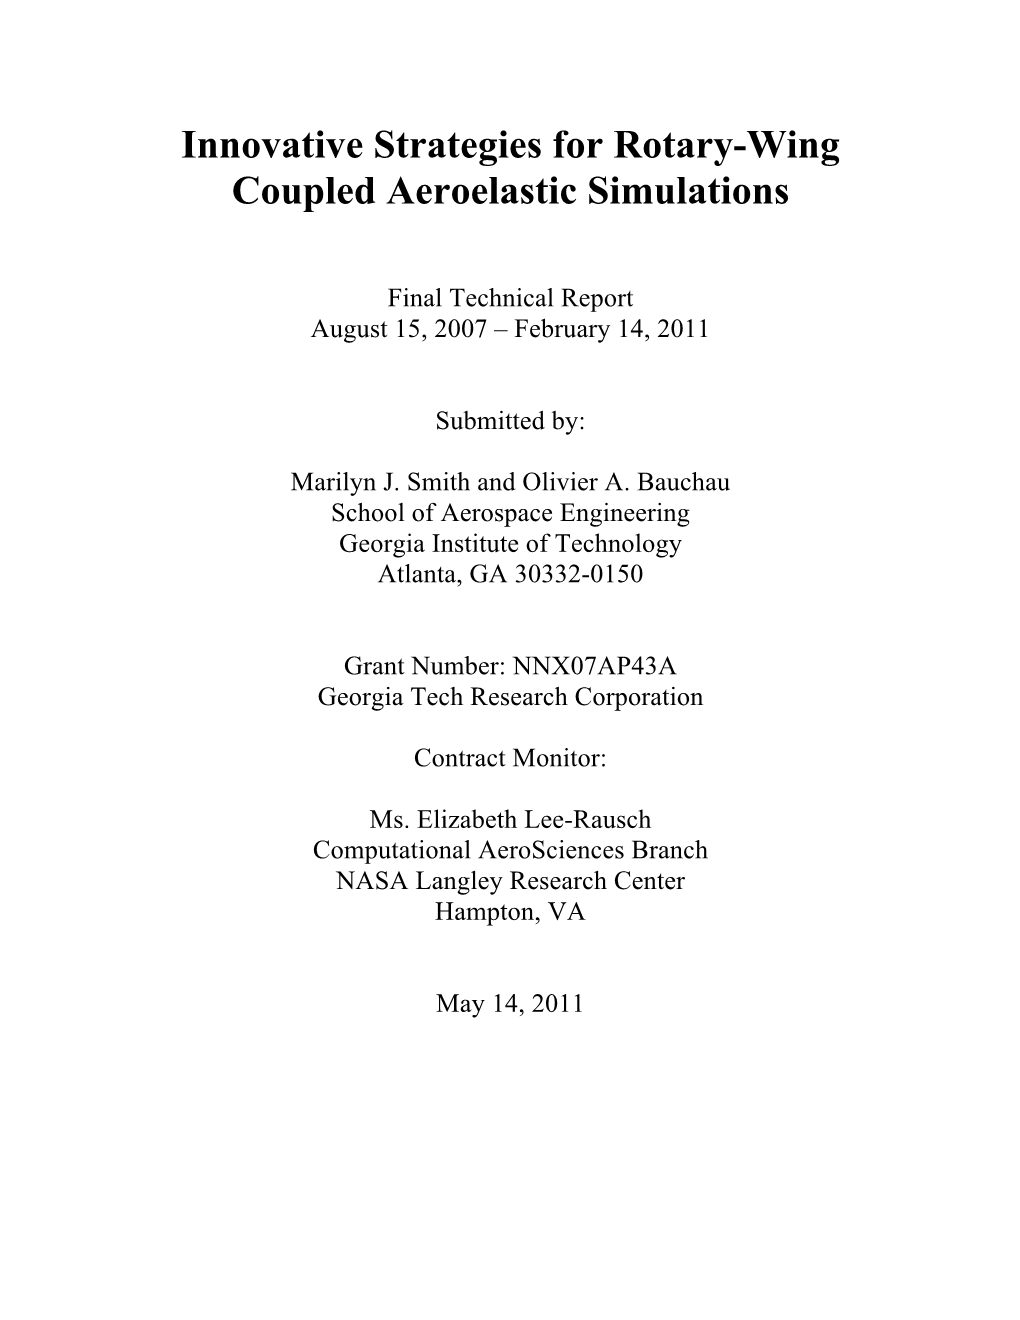 Innovative Strategies for Rotary-Wing Coupled Aeroelastic Simulations